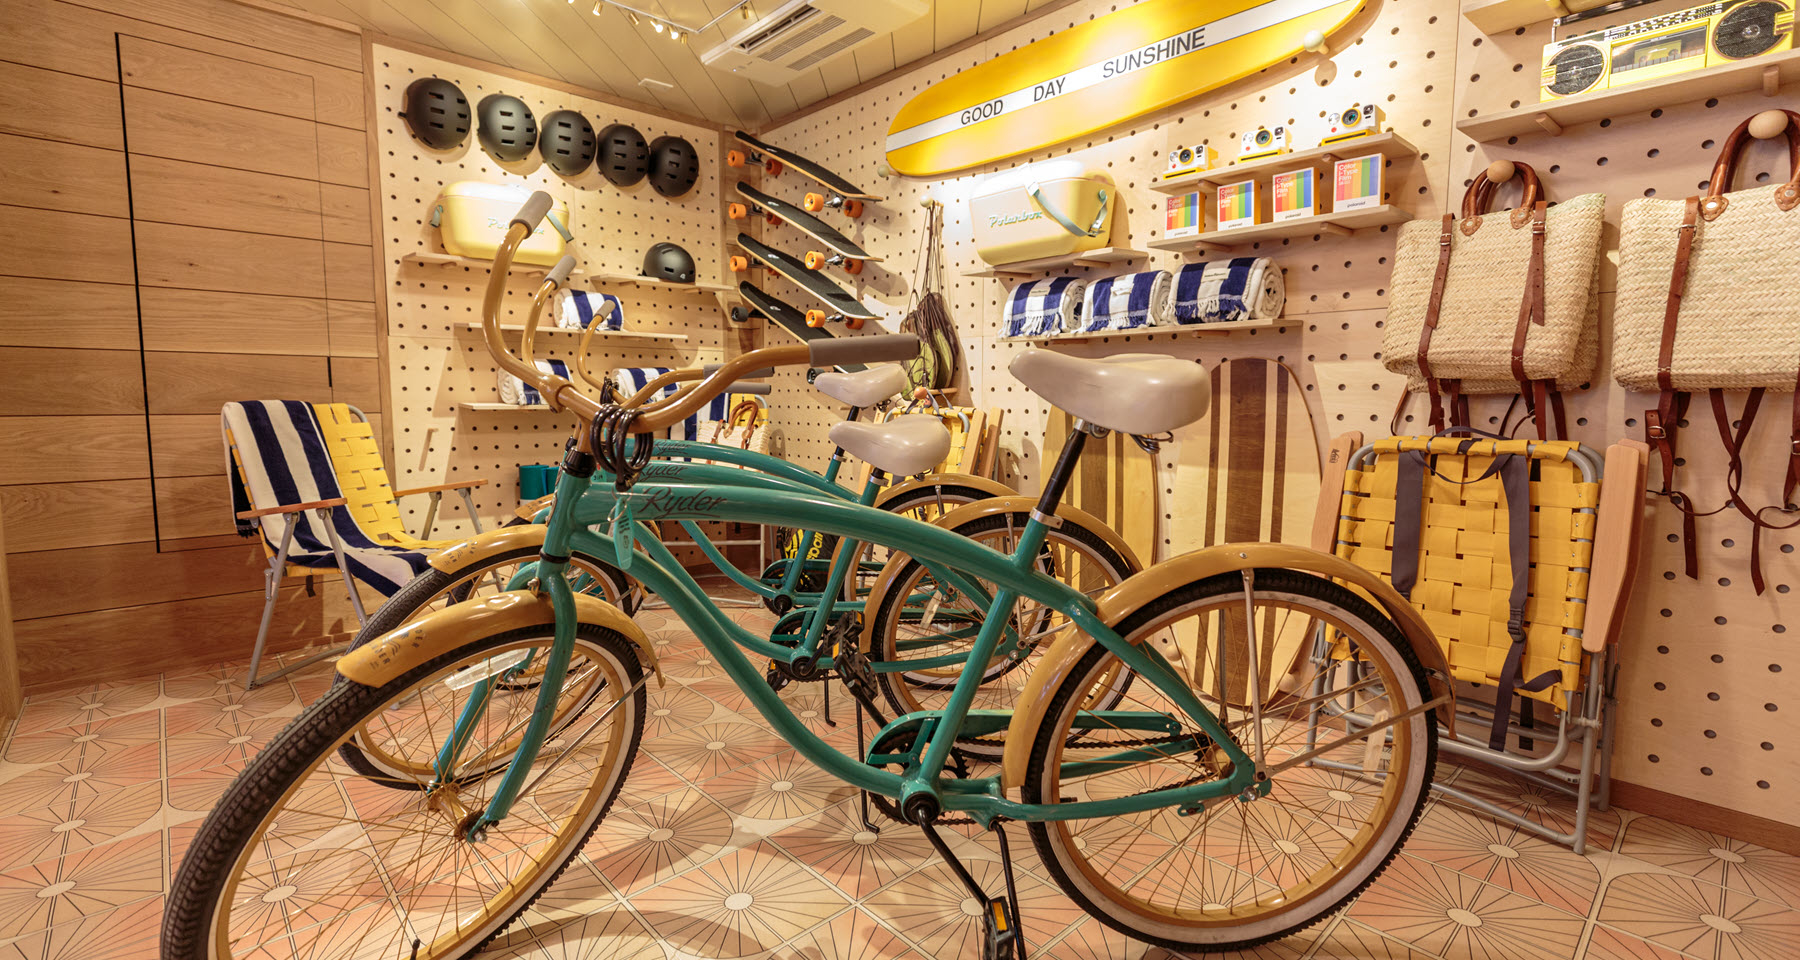 From the Google Home to a Louis Vuitton bike: some of the 12